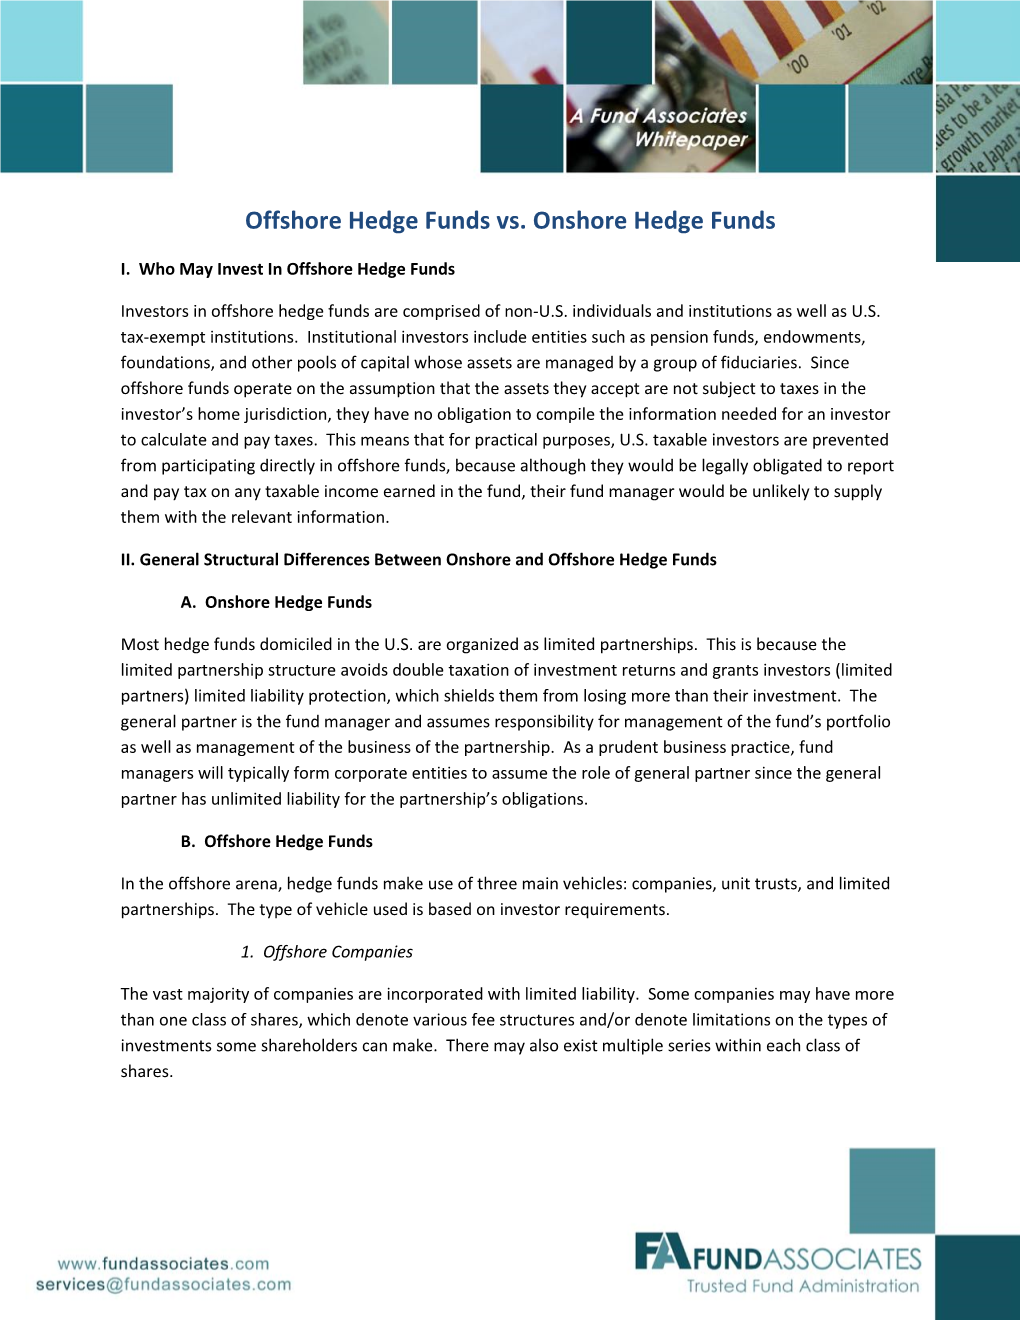 Offshore Hedge Funds Vs. Onshore Hedge Funds